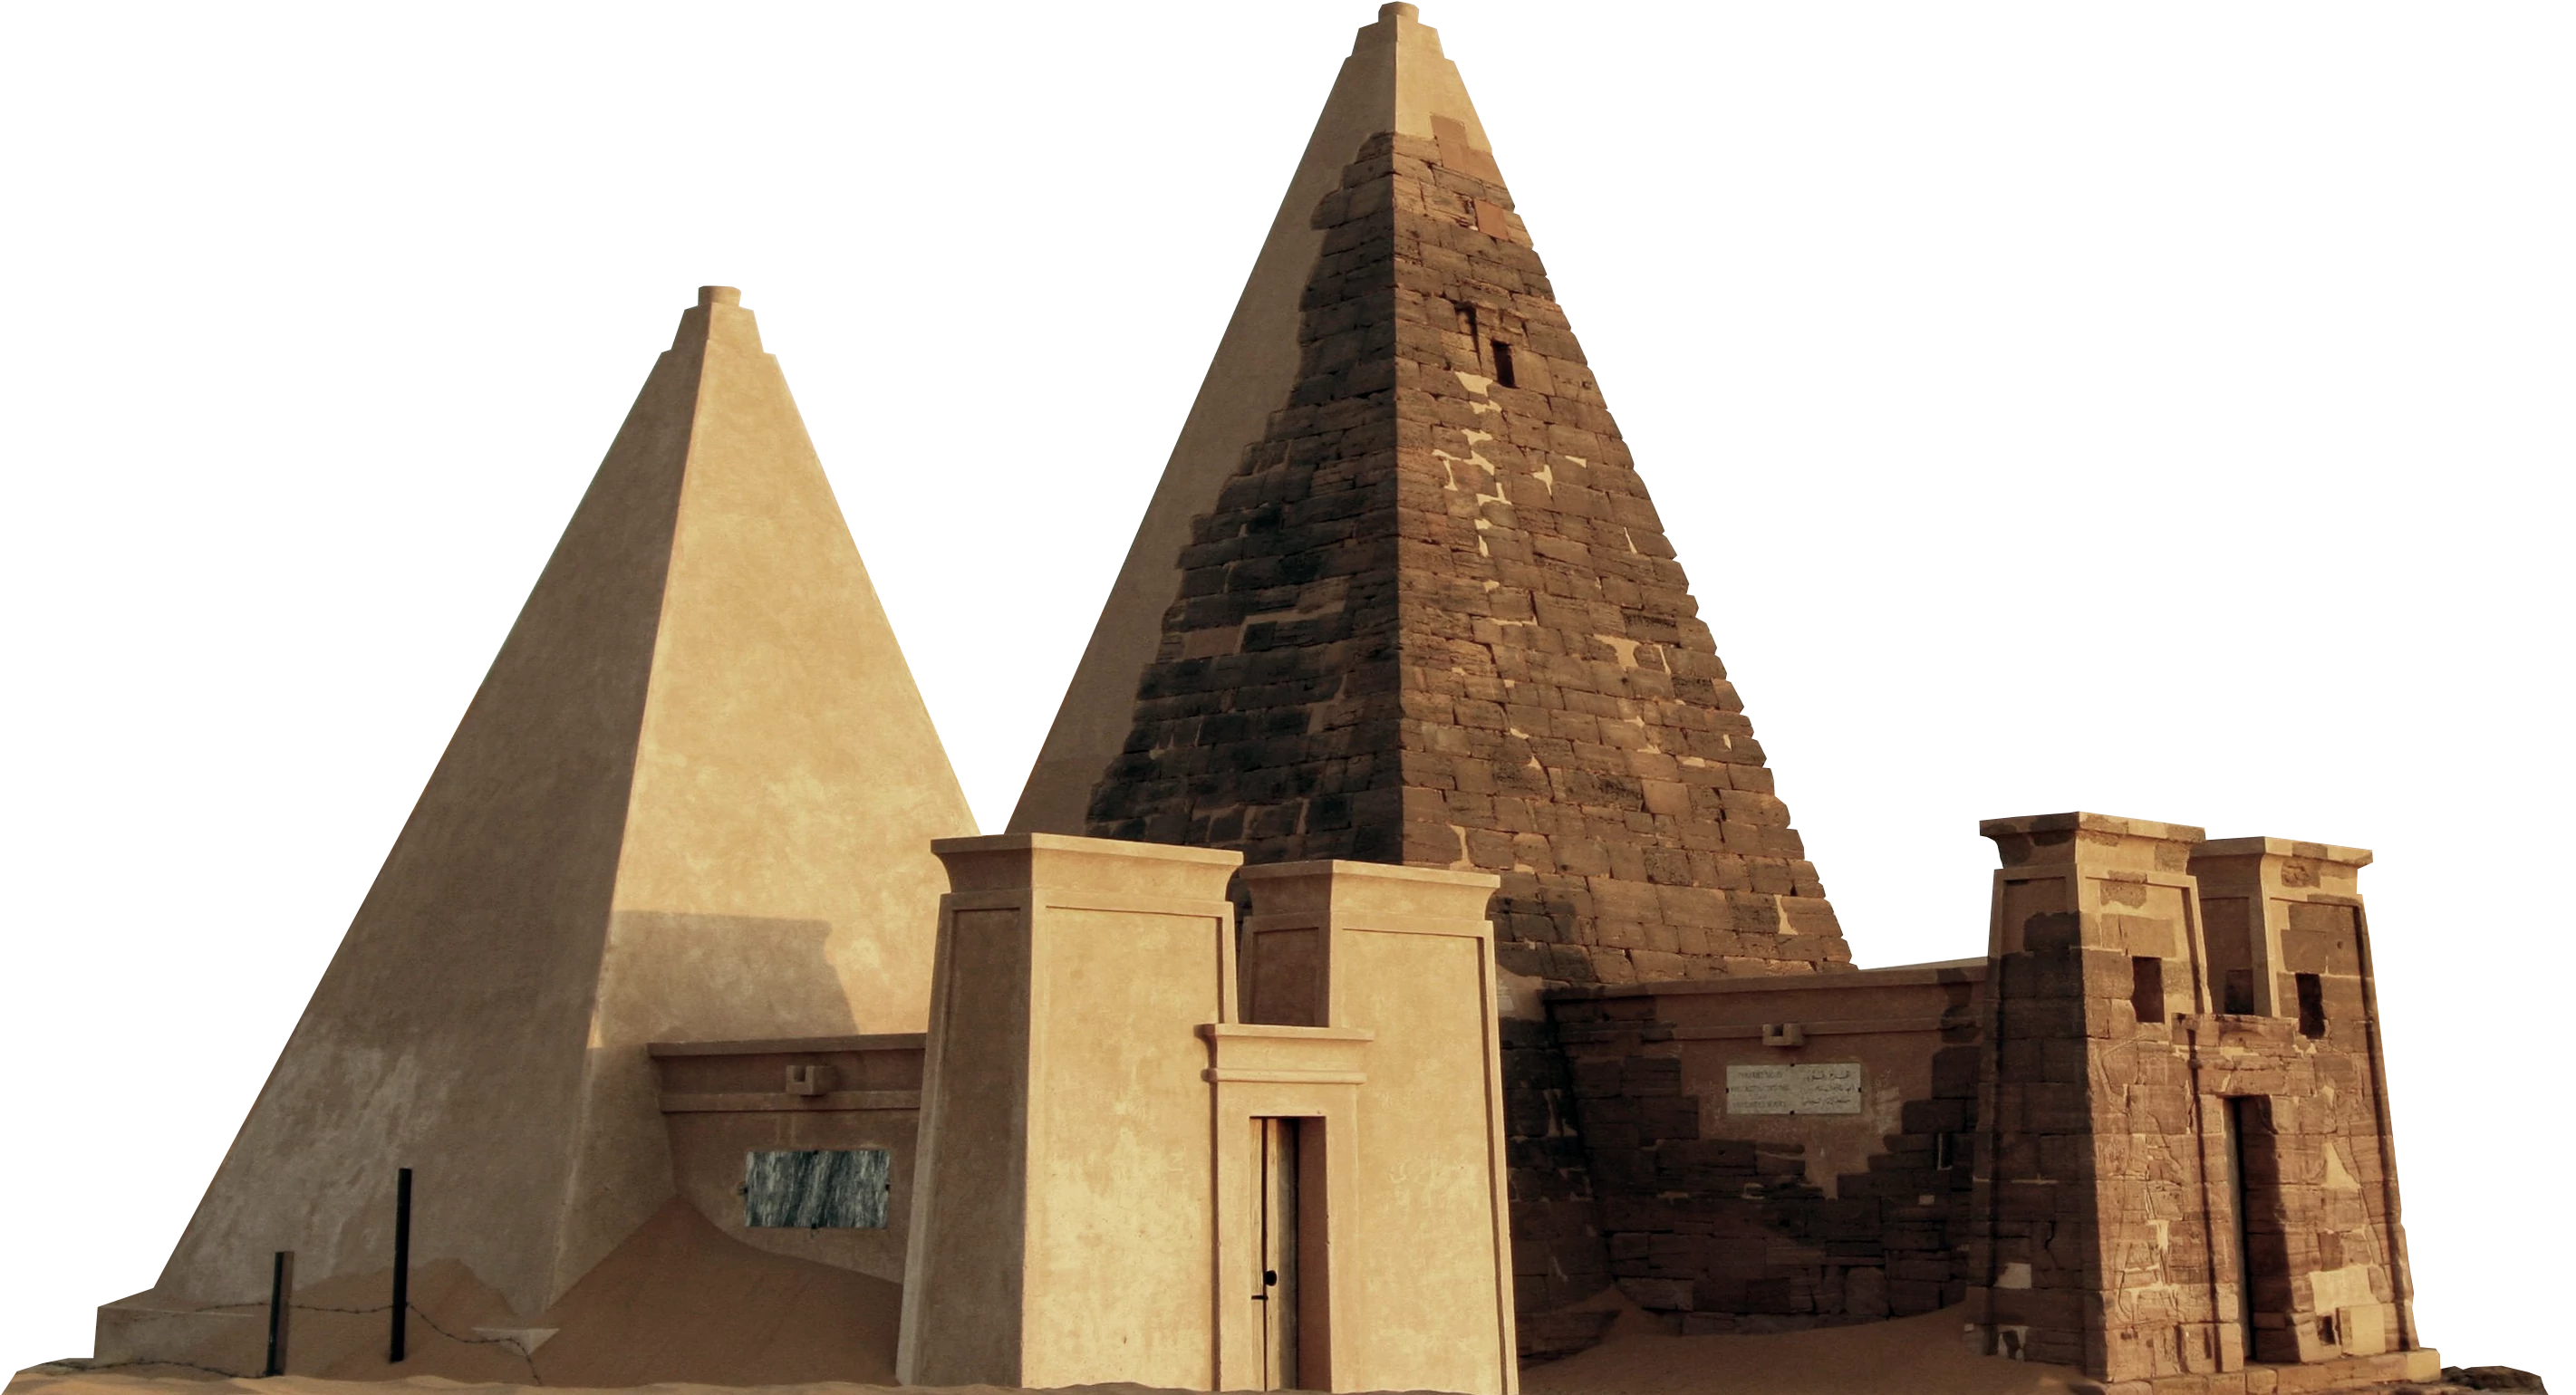 Pyramids, Structures